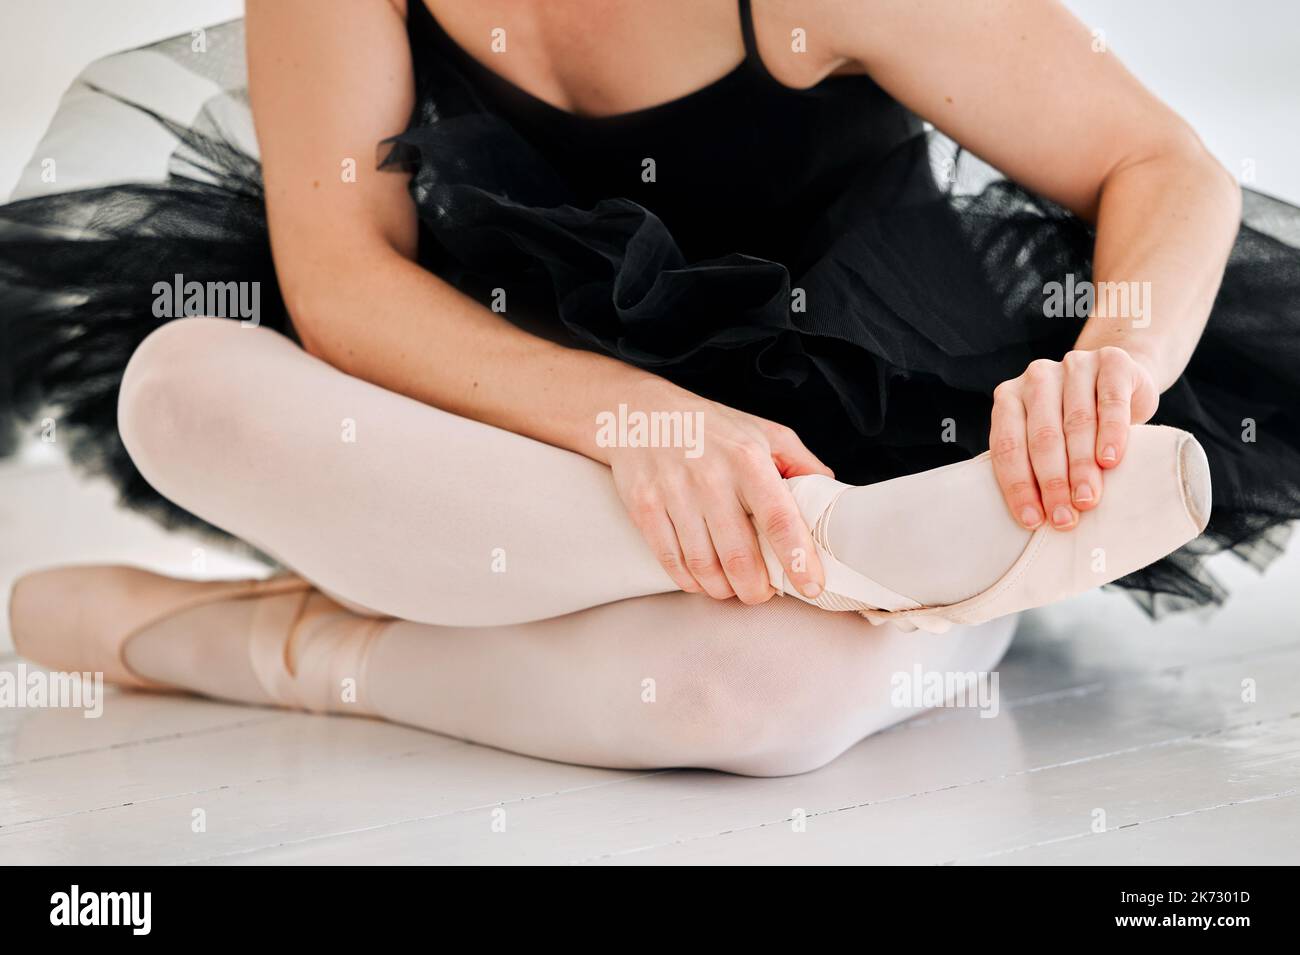 Ballet takes it toll on your feet. an unrecognizable female ballerina rubbing her feet in pain while sitting in the dance studio. Stock Photo